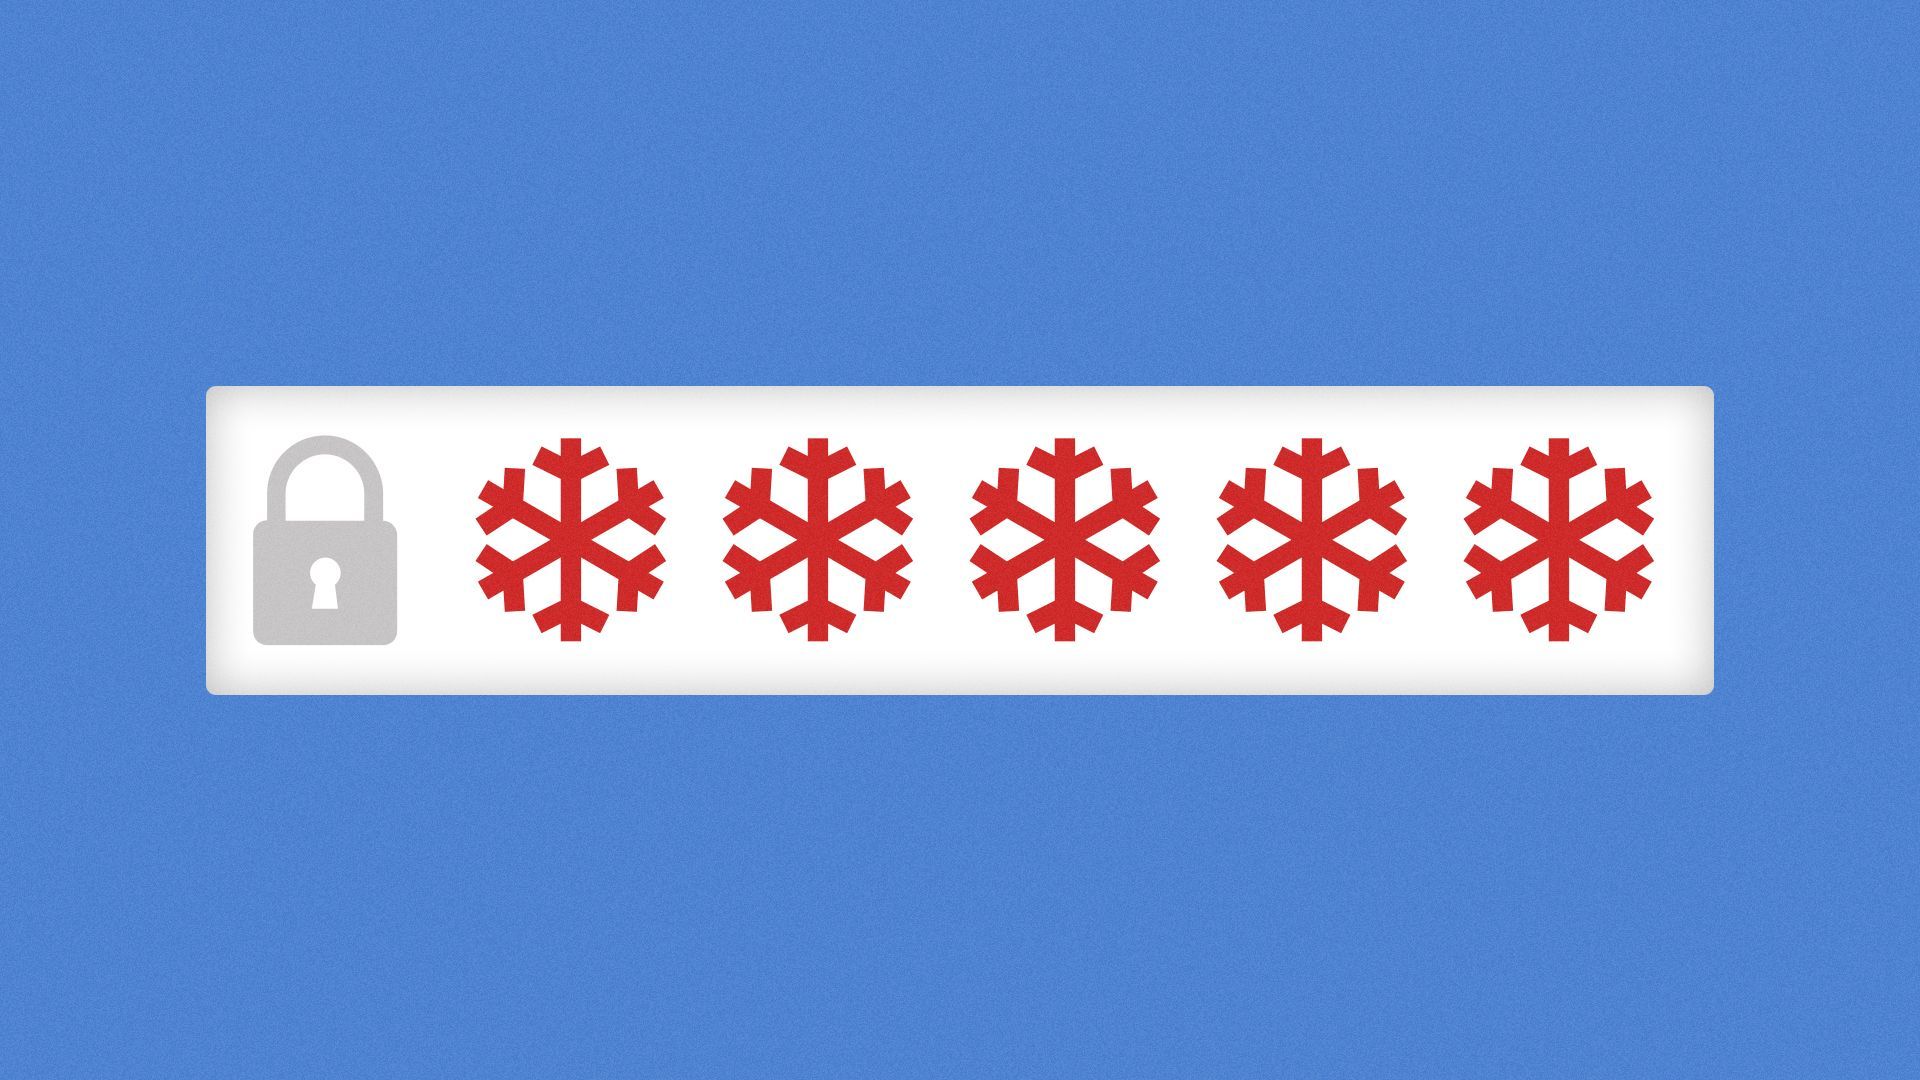 Illustration of a password formed from snowflake symbols instead of asterisks.